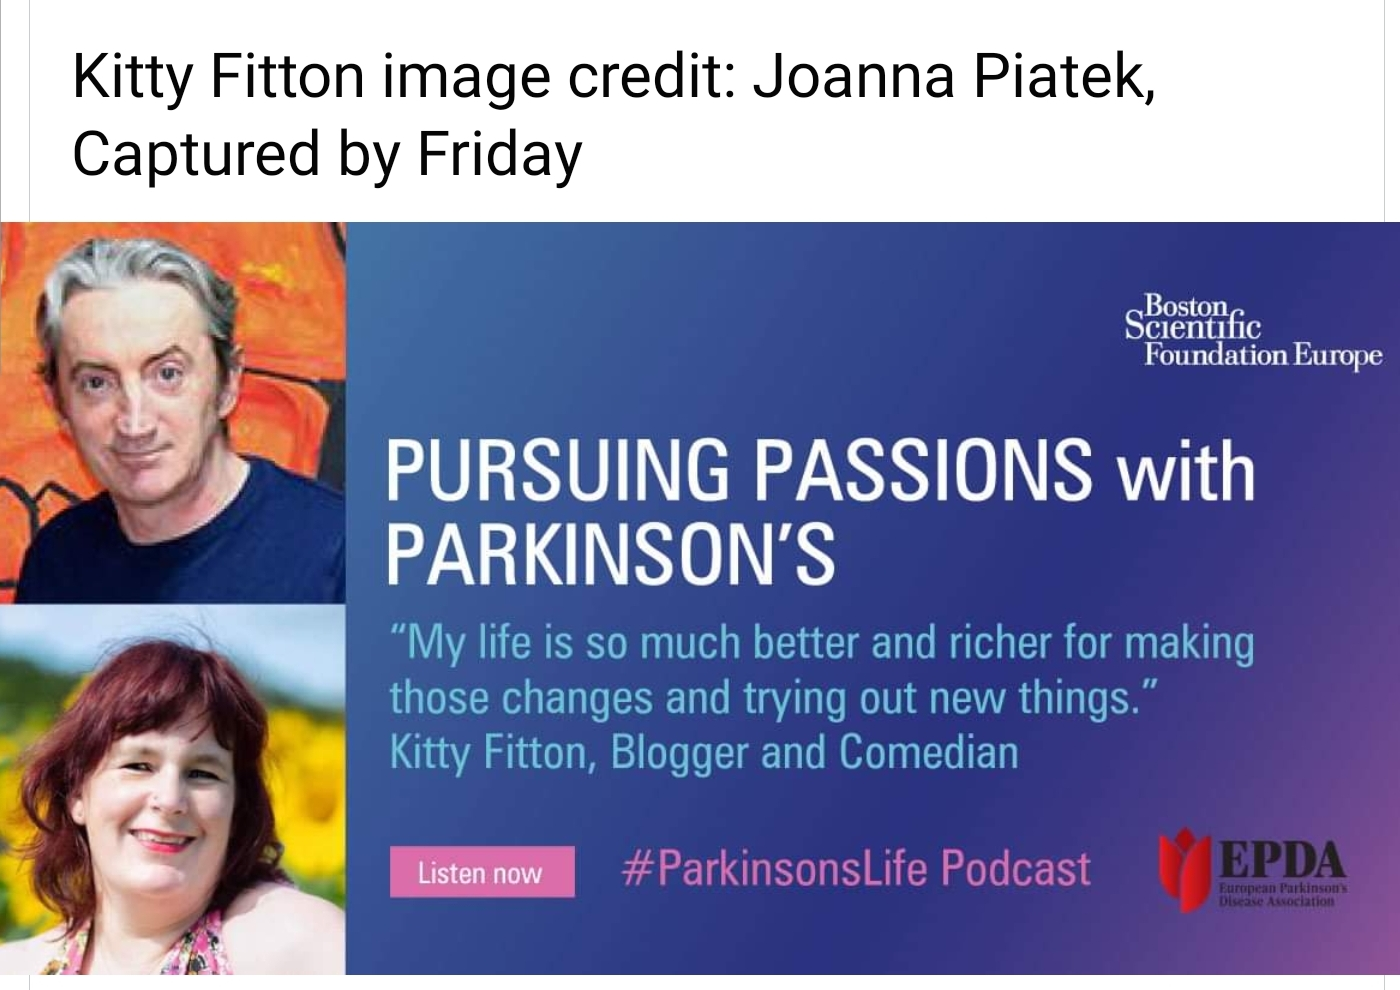 image shows an image of a man and a woman on the left and a blue block on the right with an advert for the podcast 'pursuing passions with parkinsons.'